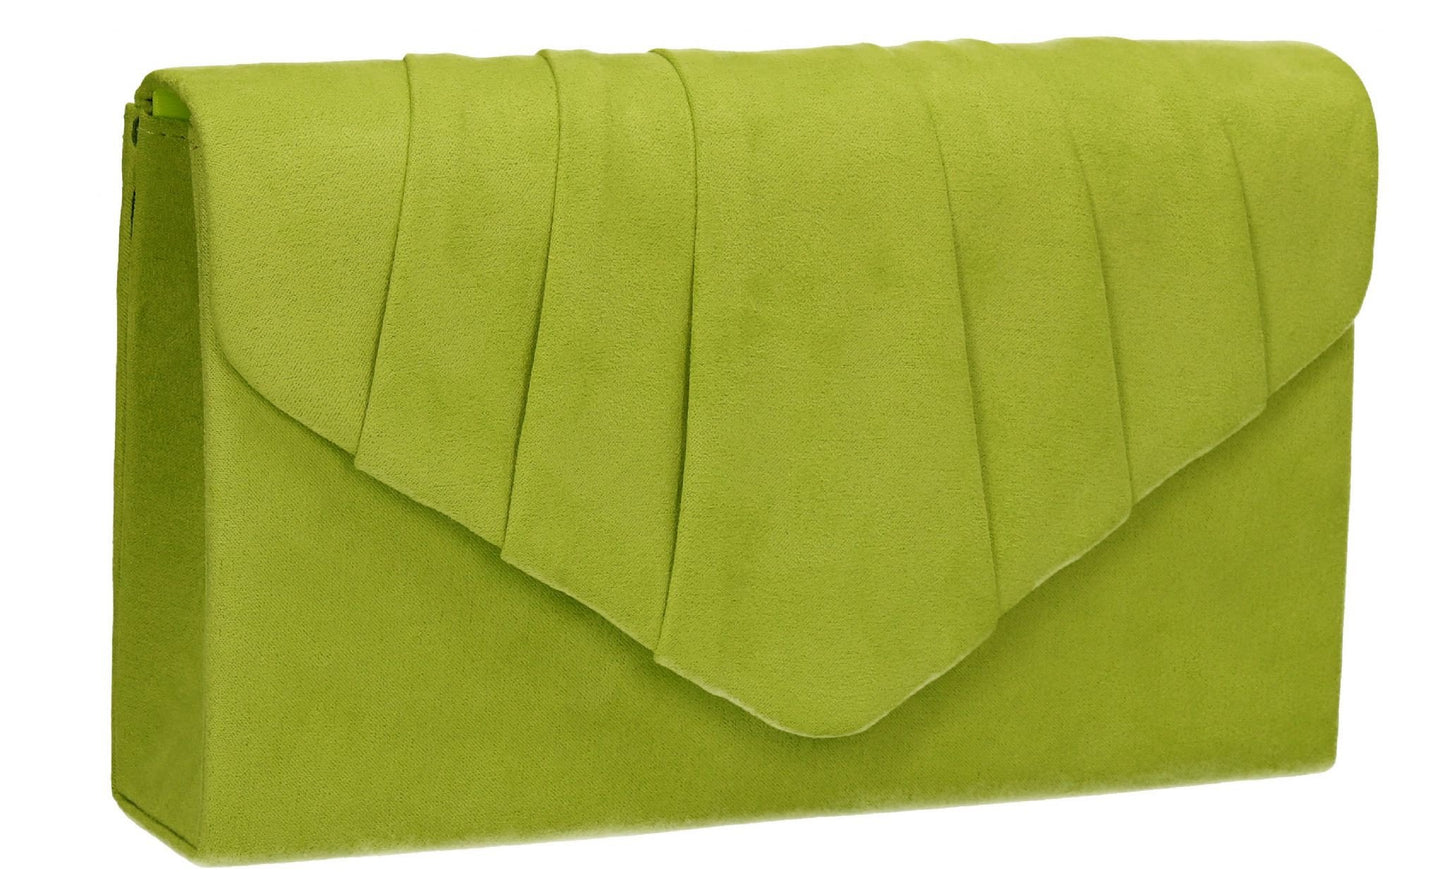 SWANKYSWANS Iggy Faux Suede Clutch Bag Lime Green Cute Cheap Clutch Bag For Weddings School and Work